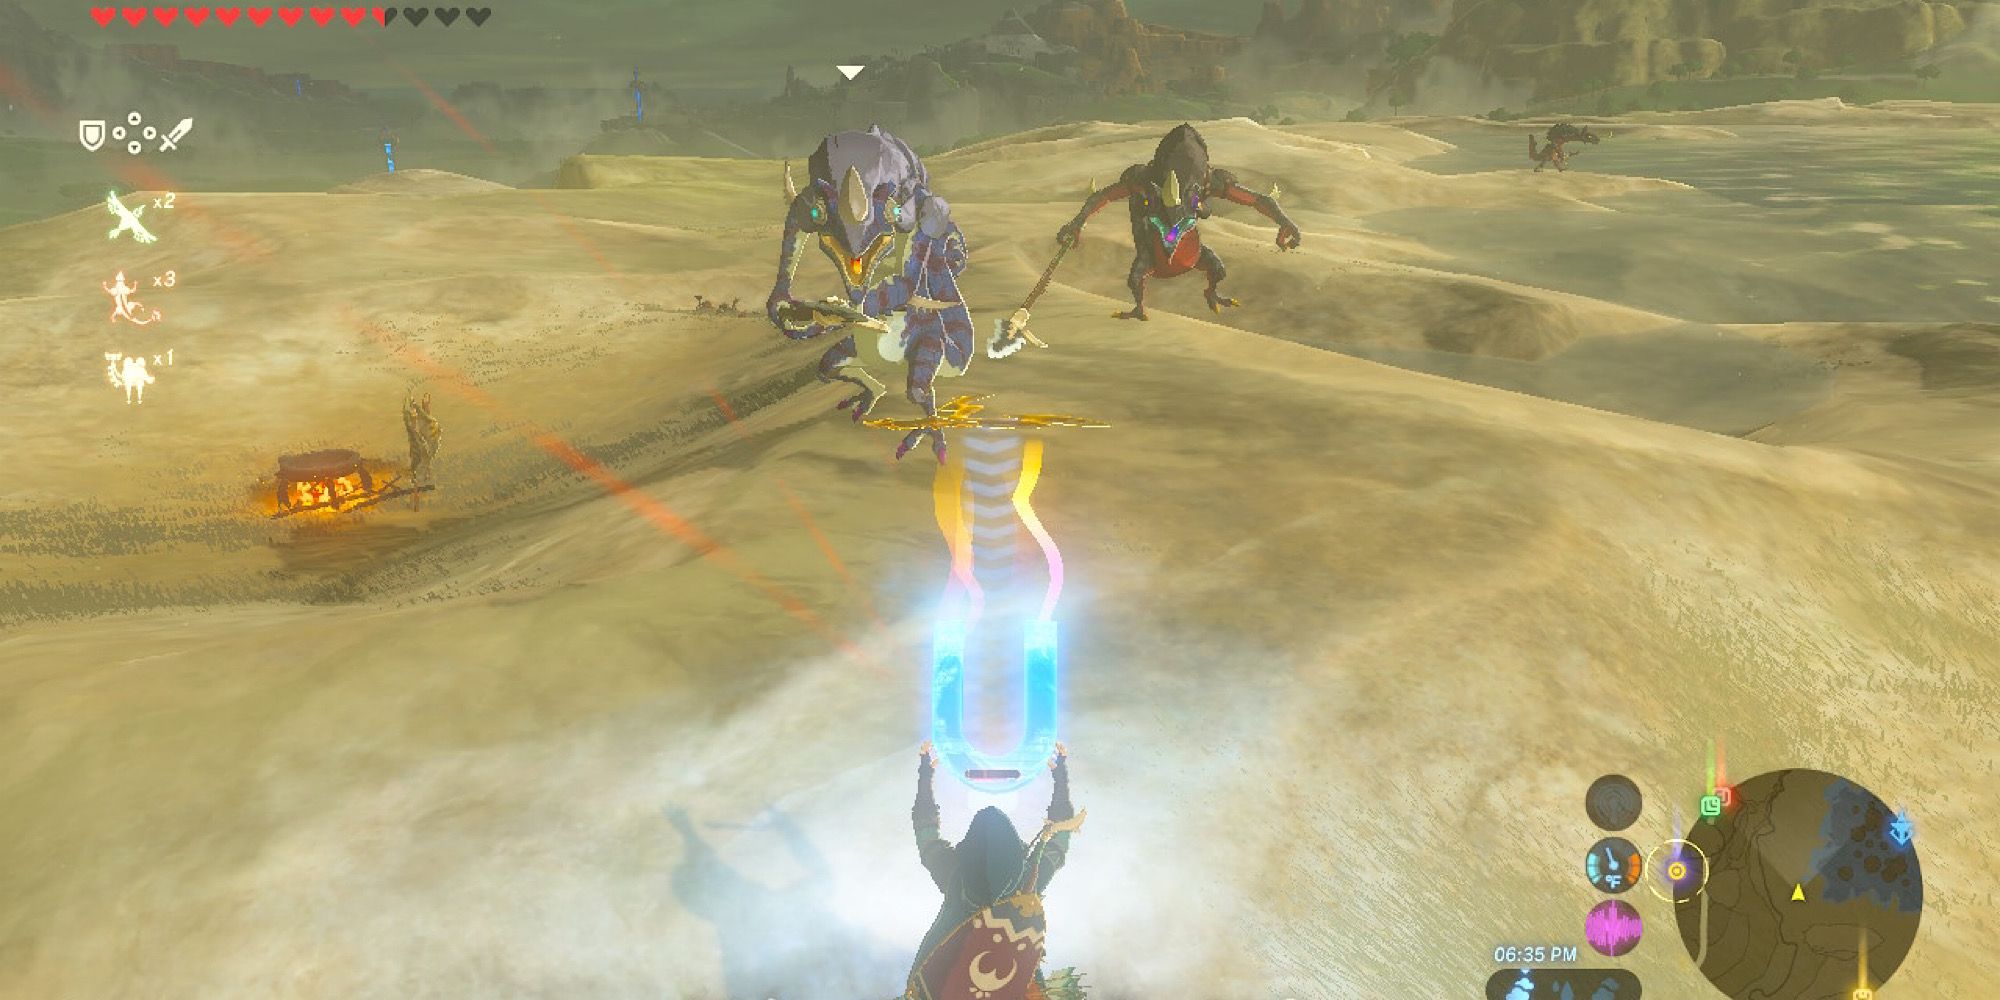 Zelda: Most Clever BOTW Magnesis Tricks Players Have Found So Far Link spinning boomerang